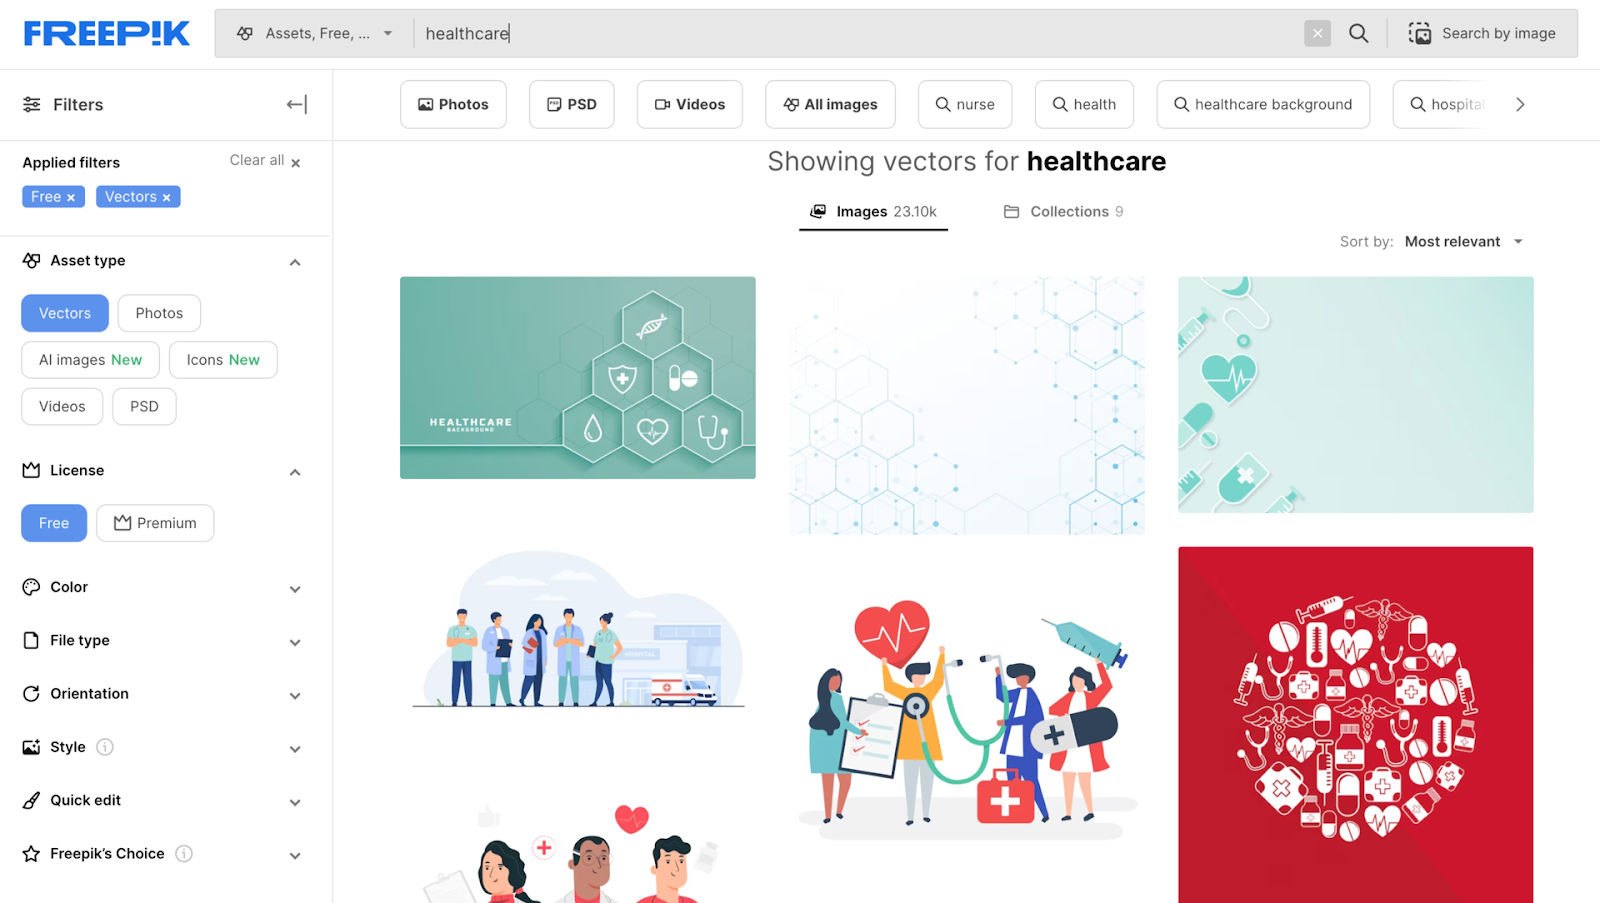 Freepik results page for "healthcare"